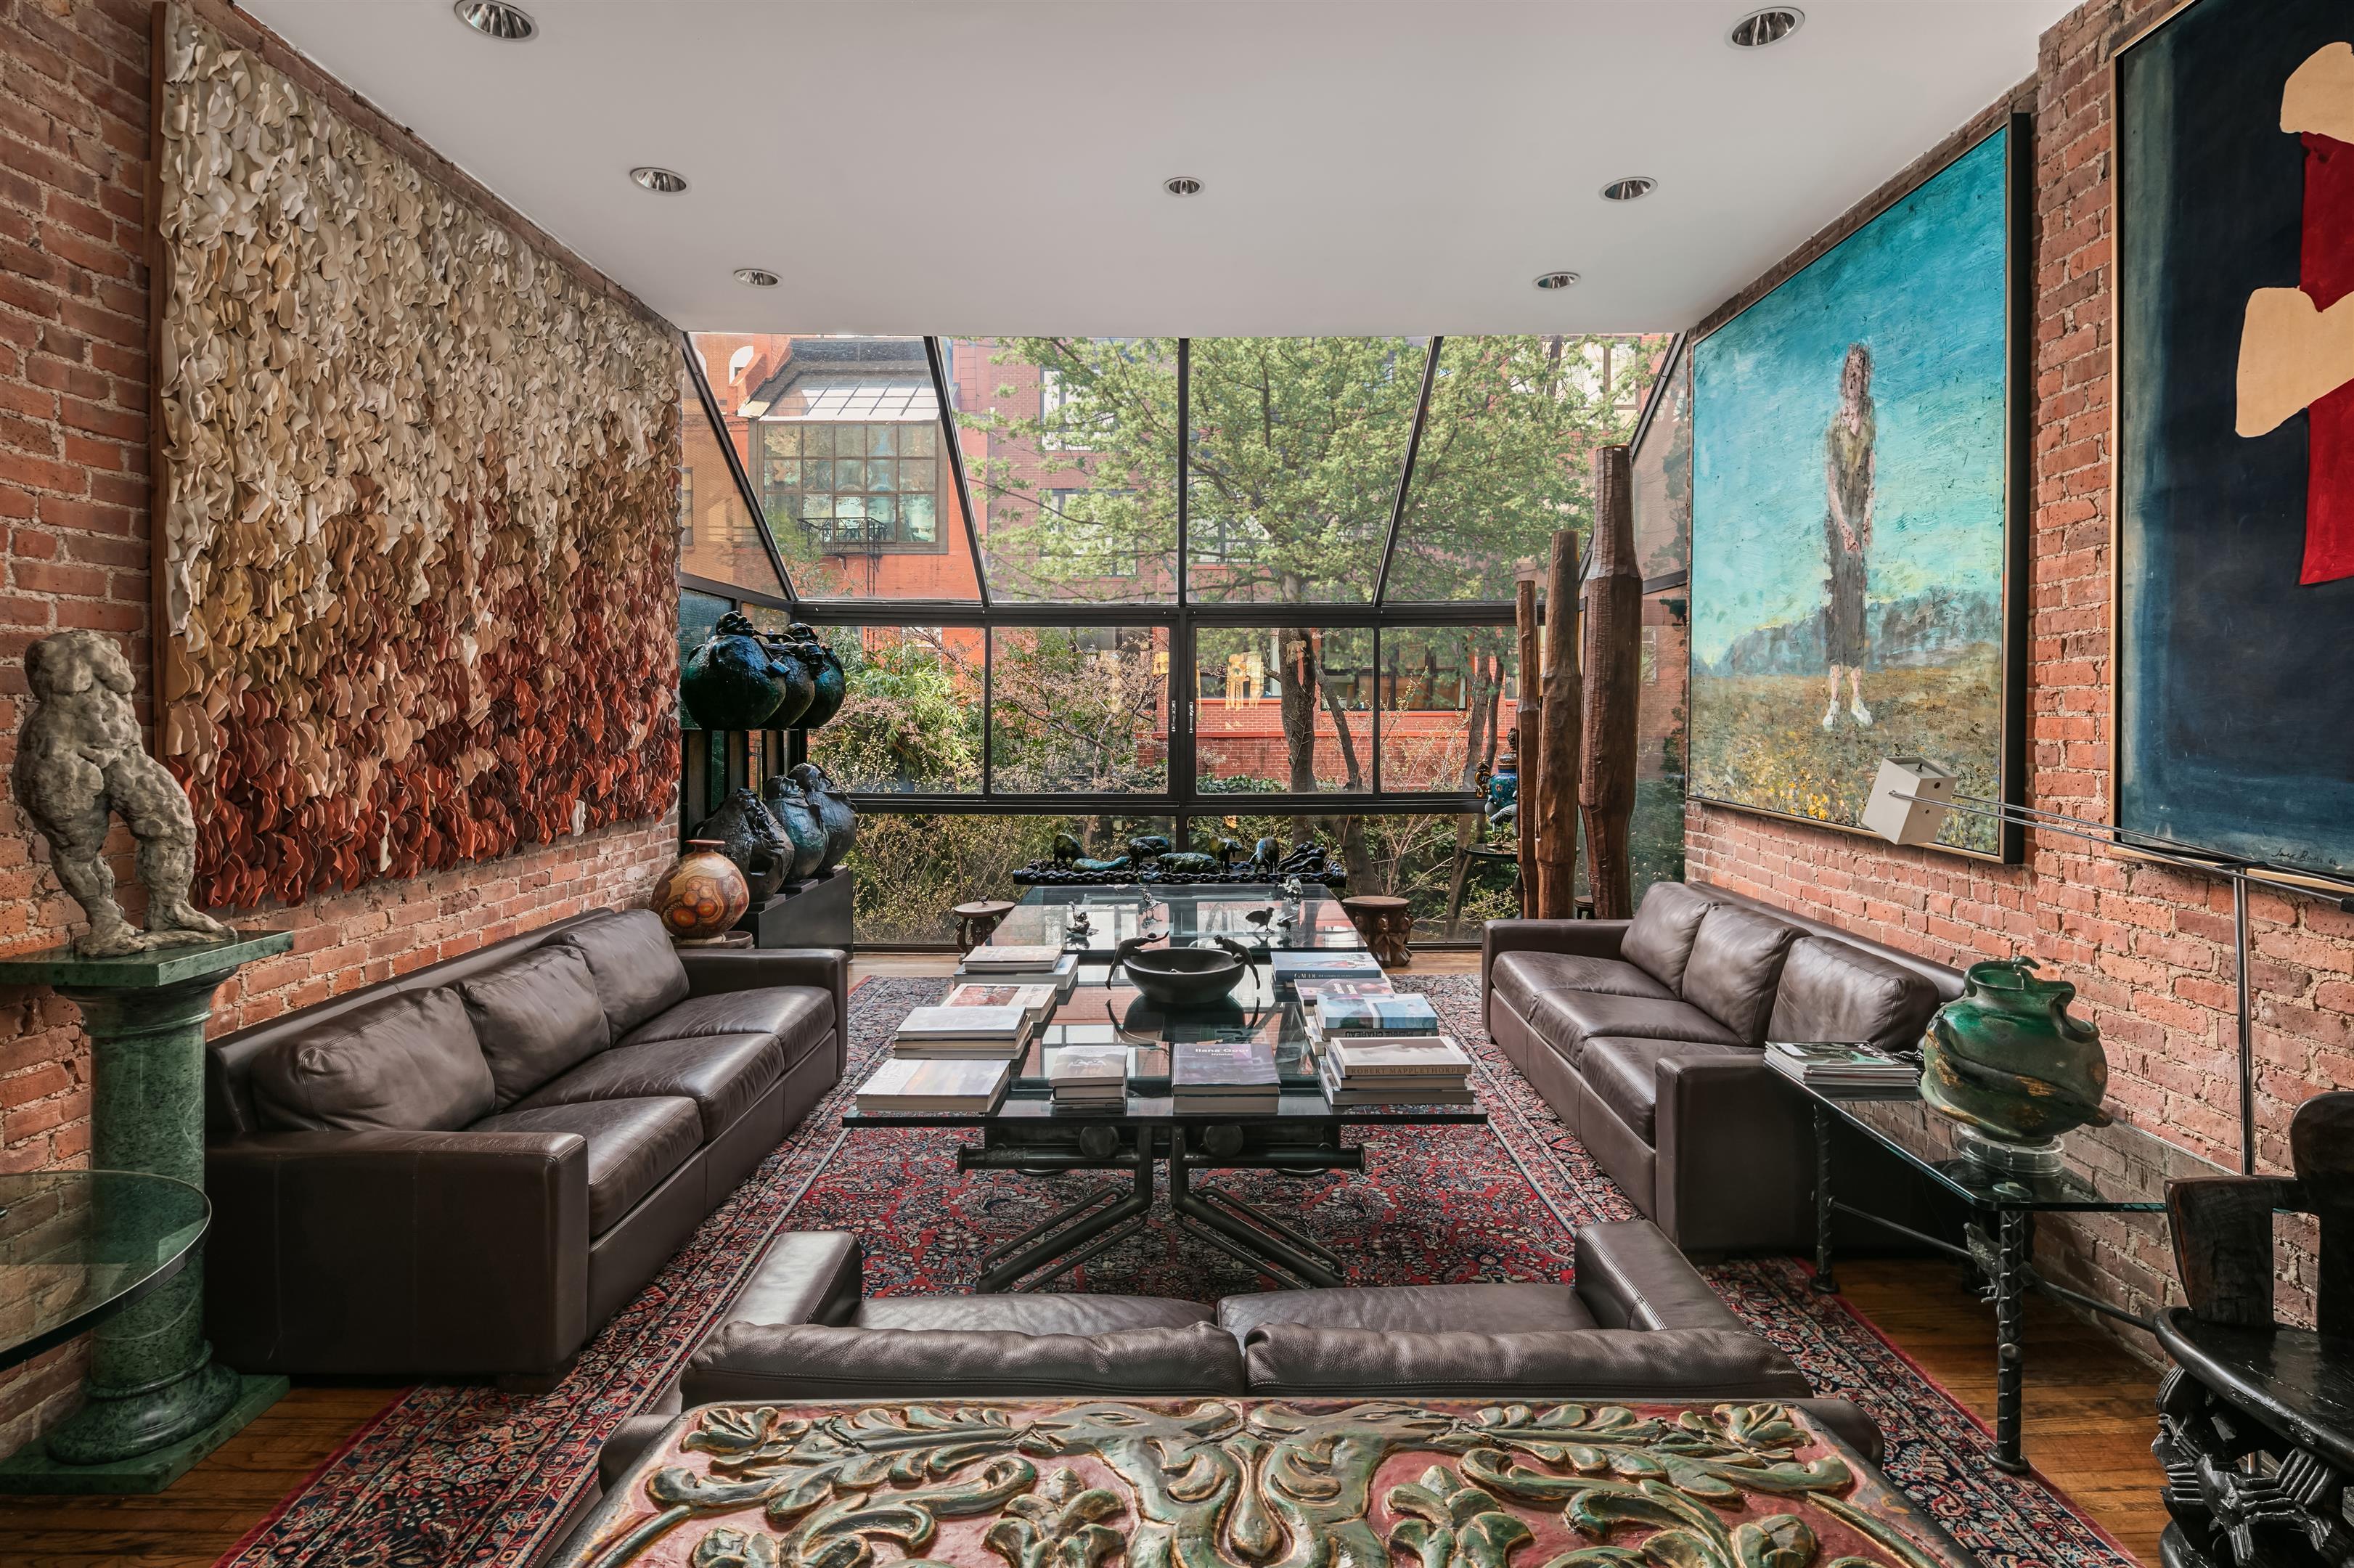 178 East 75th Street, Lenox Hill, Upper East Side, NYC - 5 Bedrooms  
5.5 Bathrooms  
12 Rooms - 